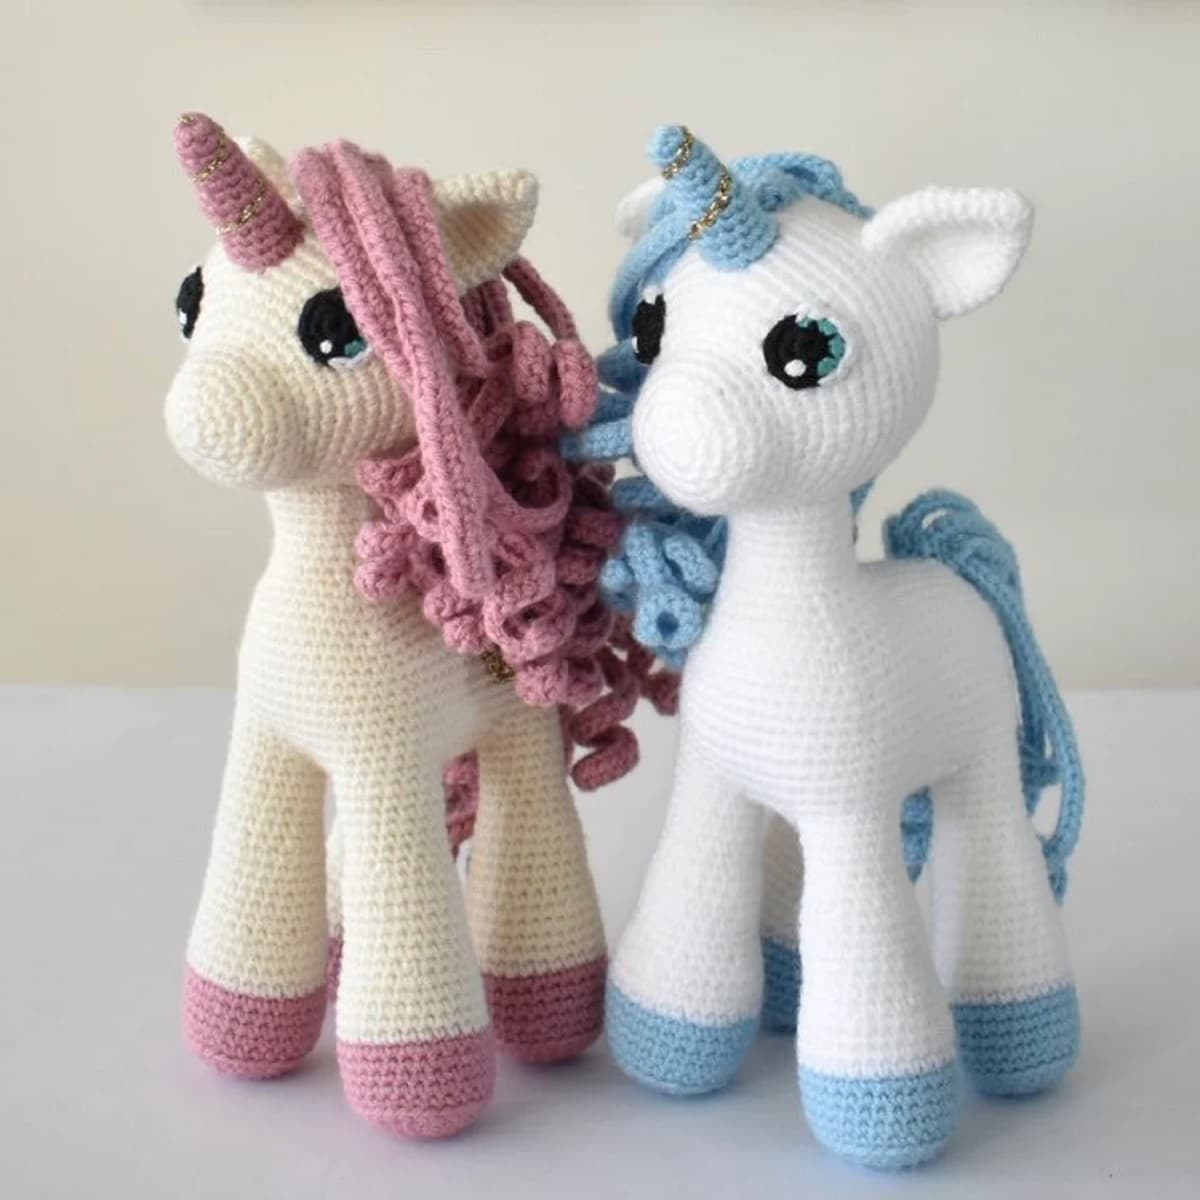 A cream crochet unicorn with a pink horn, mane, and feet next to a white unicorn with a blue horn, feet, and mane.